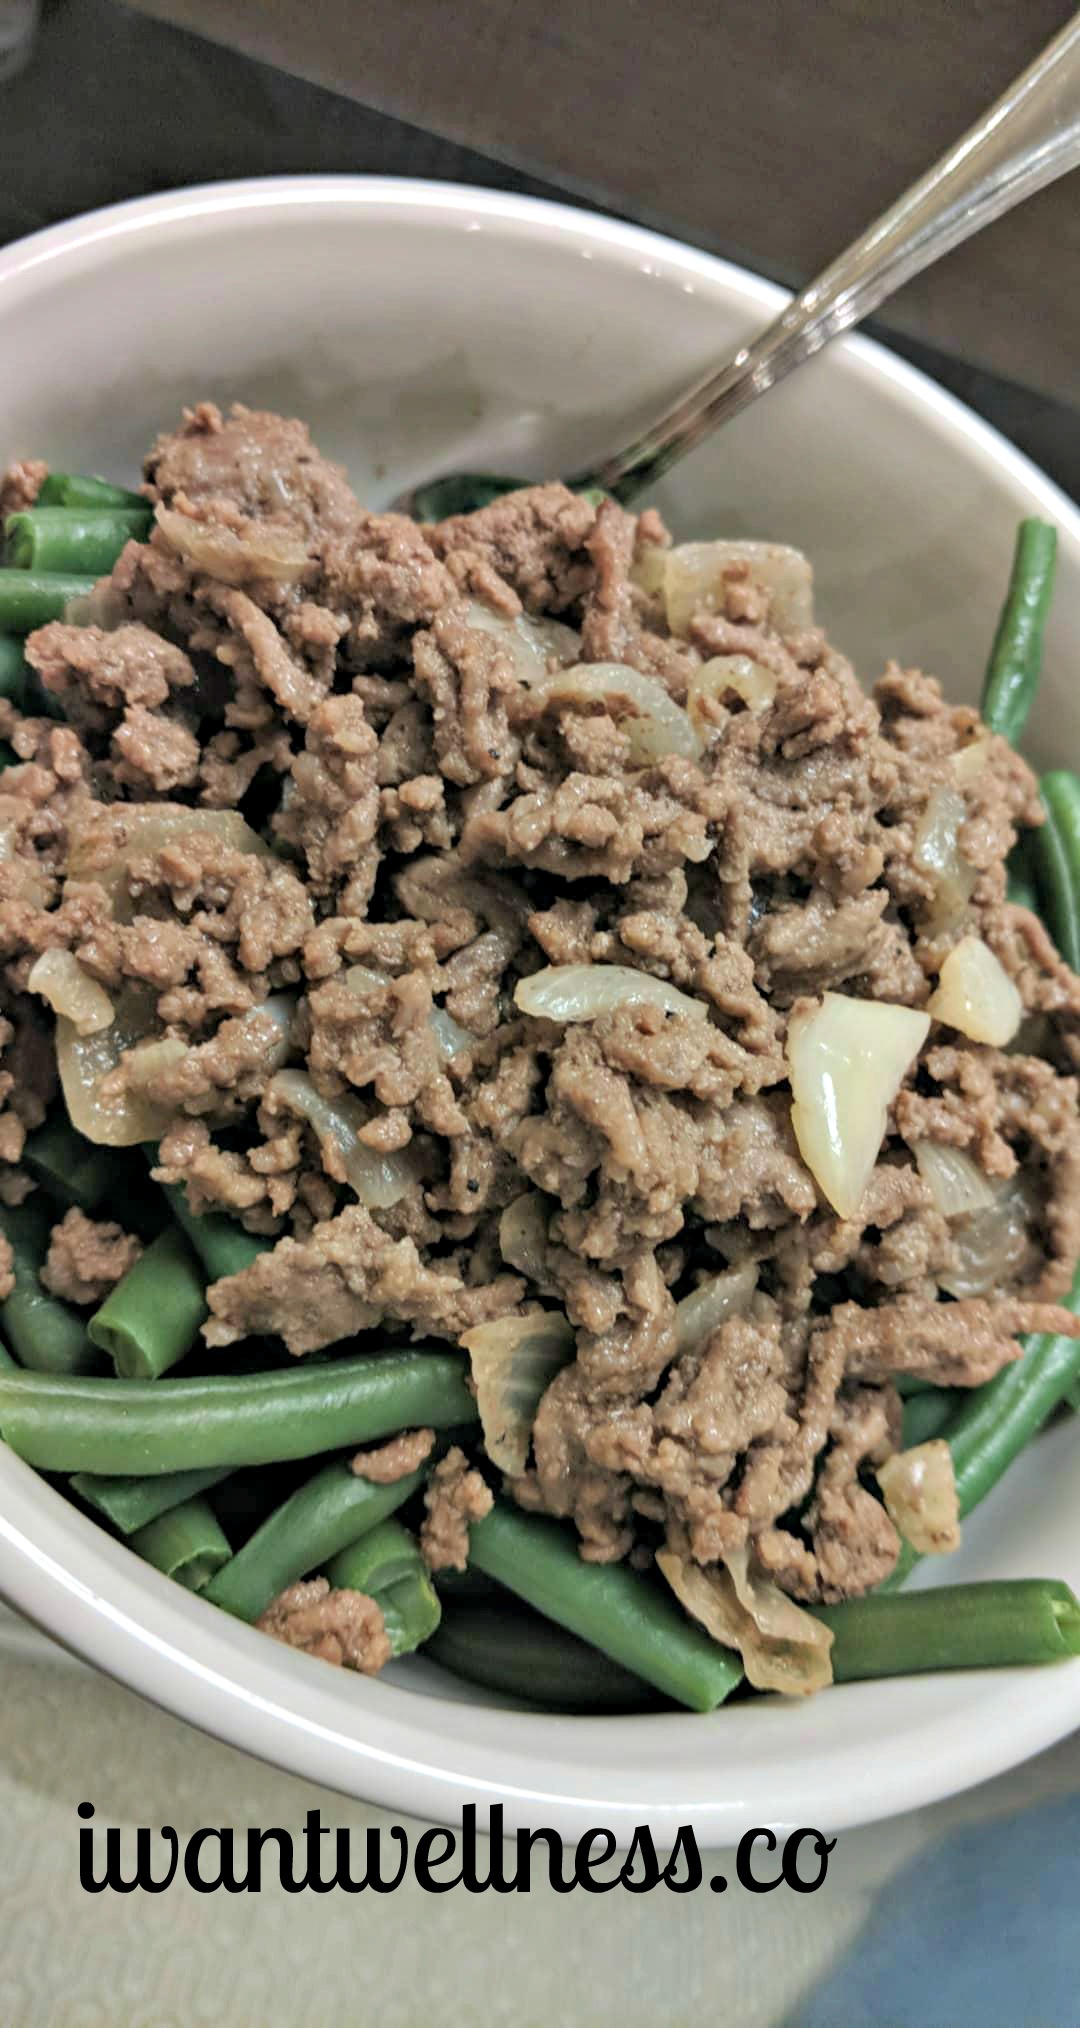 Garlic Beef and Onions with Green Beans